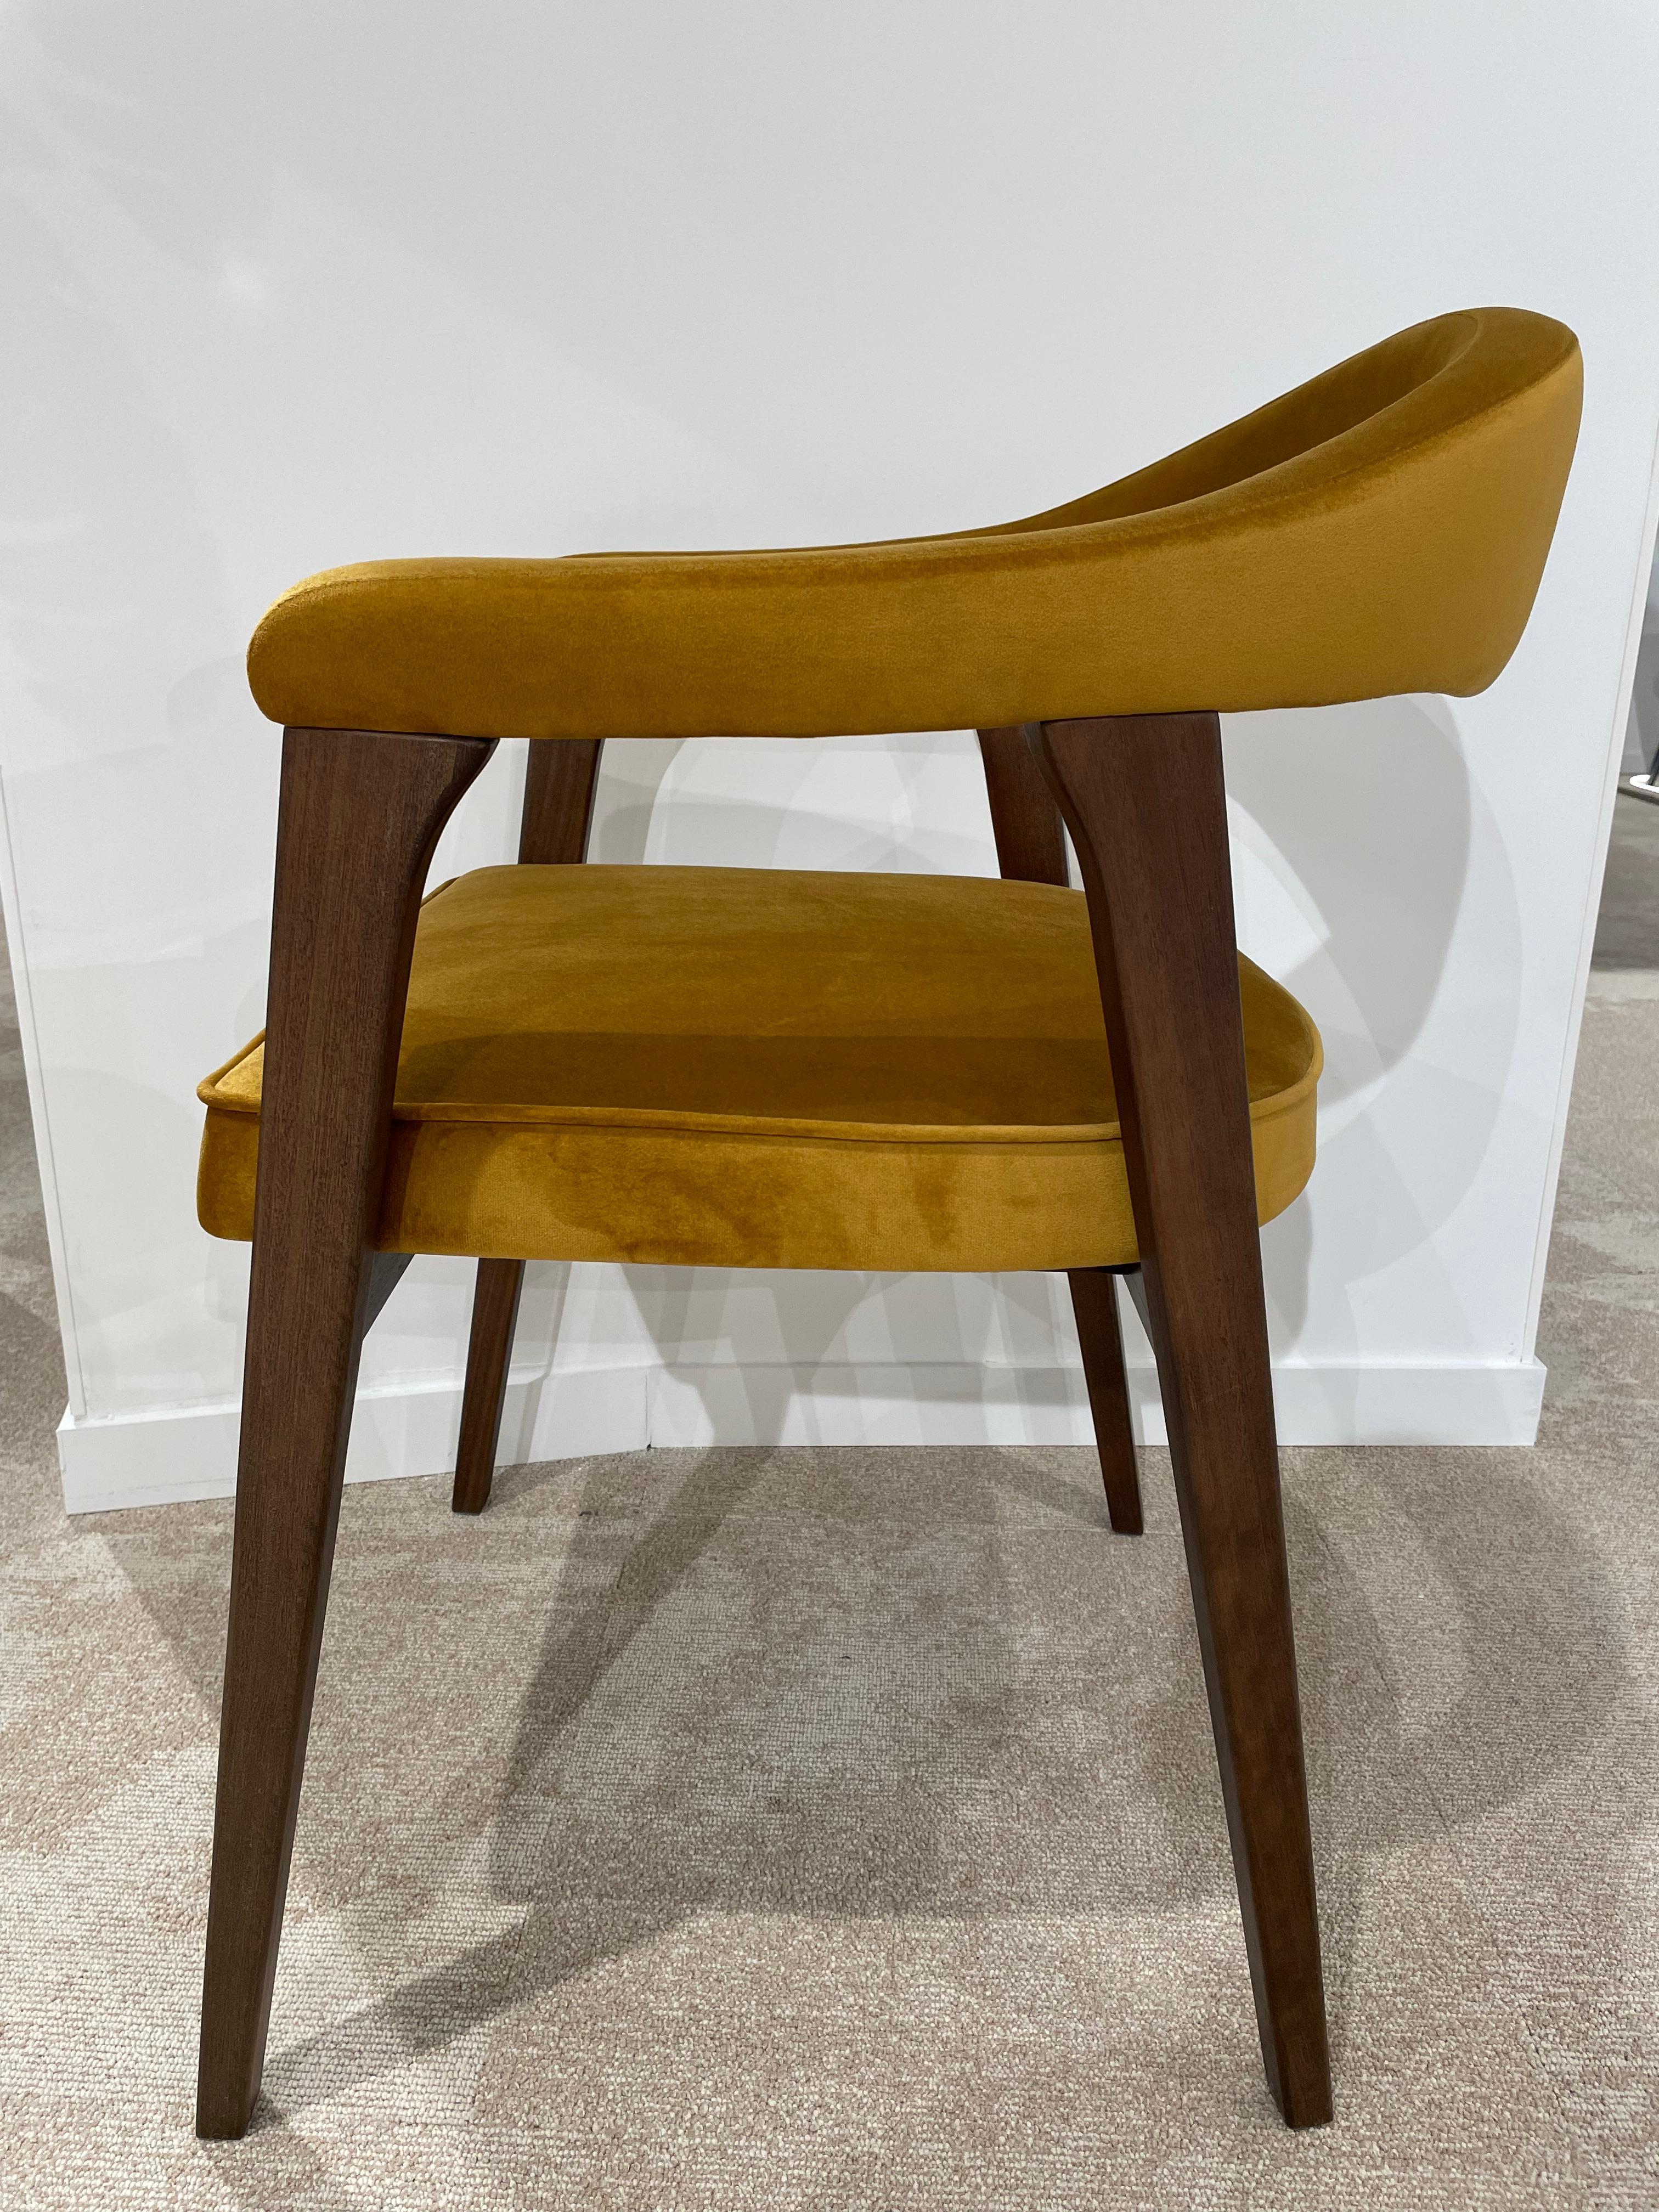 1960s Danish Design and Scandinavian style wooden and velvet fabric chair, around the dining table, it will be perfect in the office too!
 